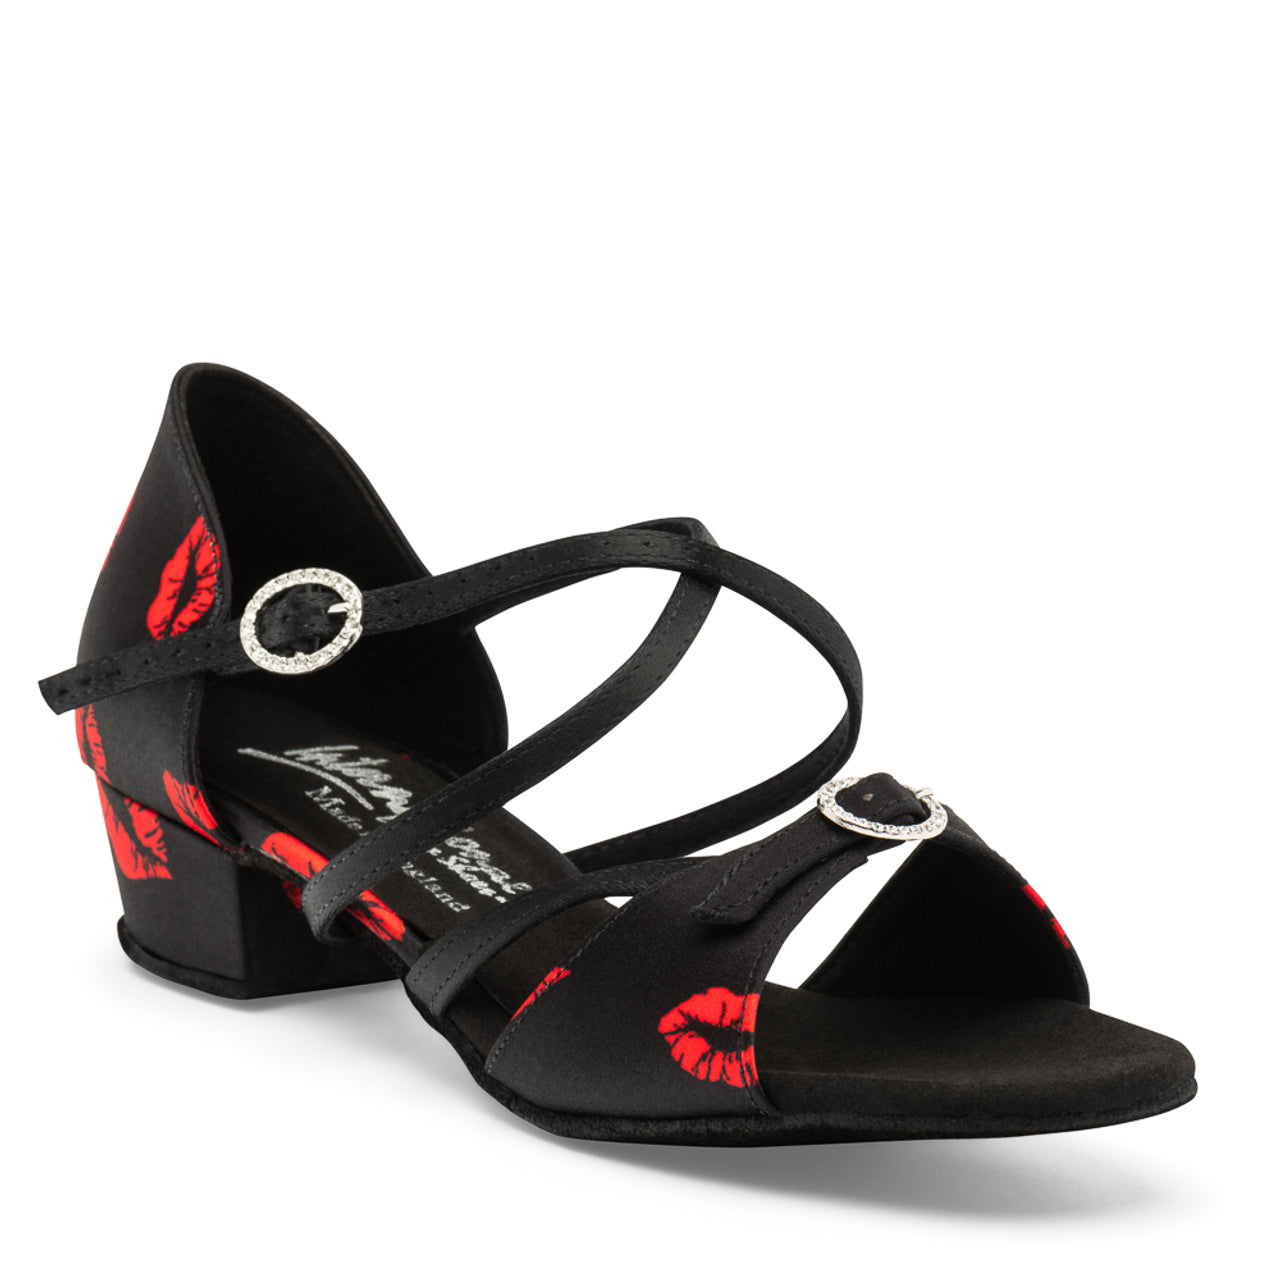 International Dance Shoes IDS Youth Girls Latin Technique and Competition Ballroom Dance Shoe with Adjustable Buckle and Toe Strap NATASHA